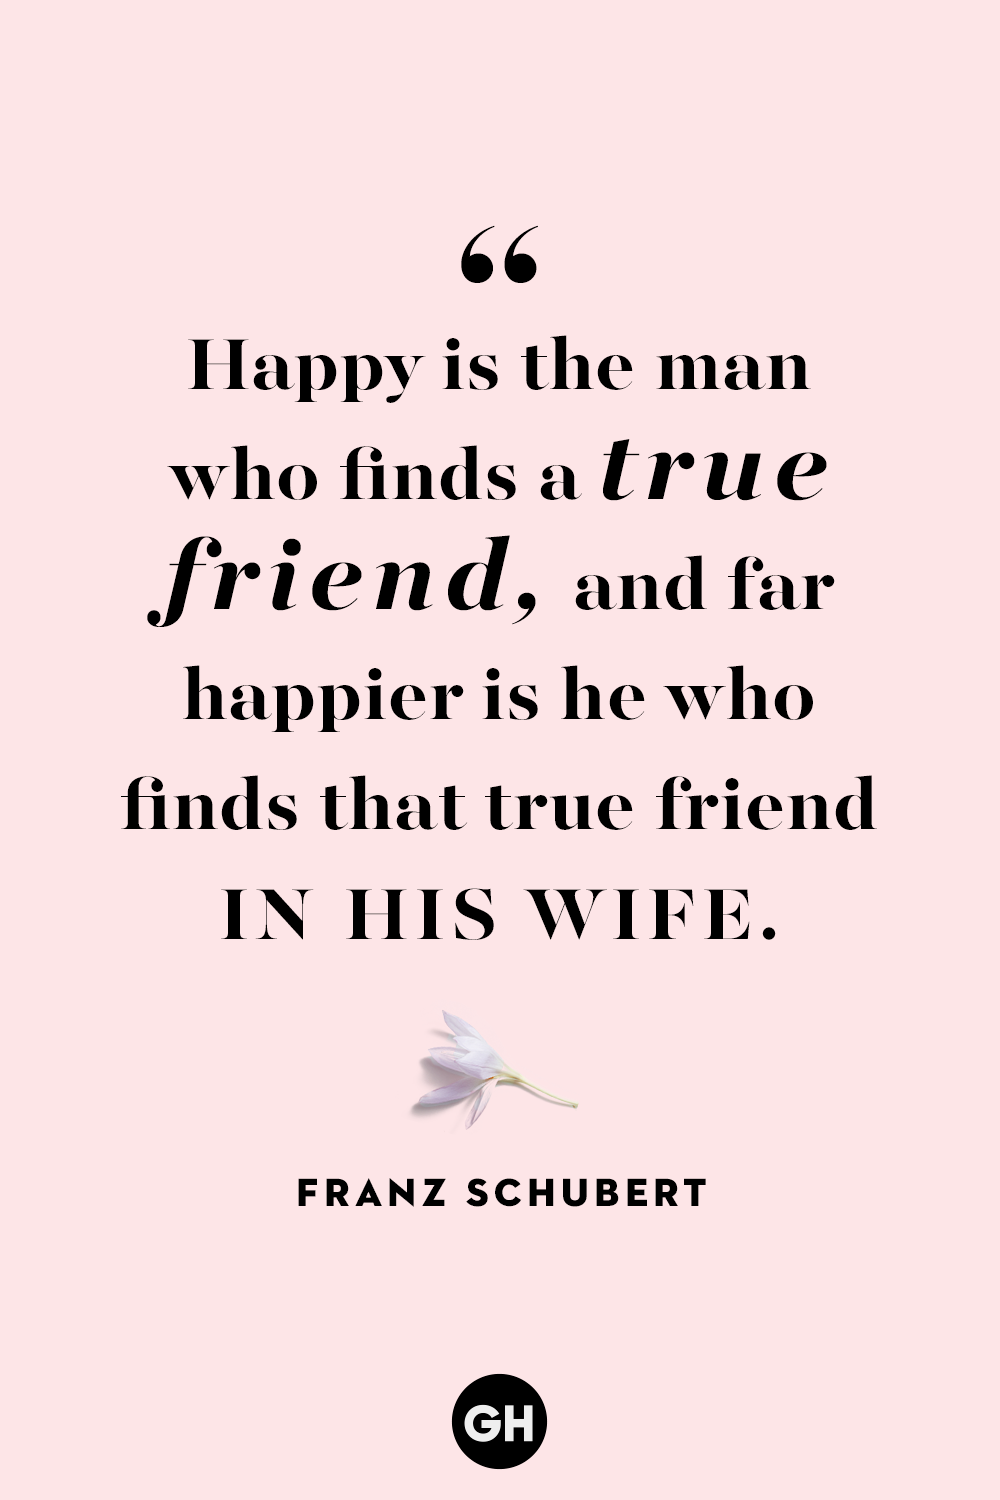 best marriage quotes